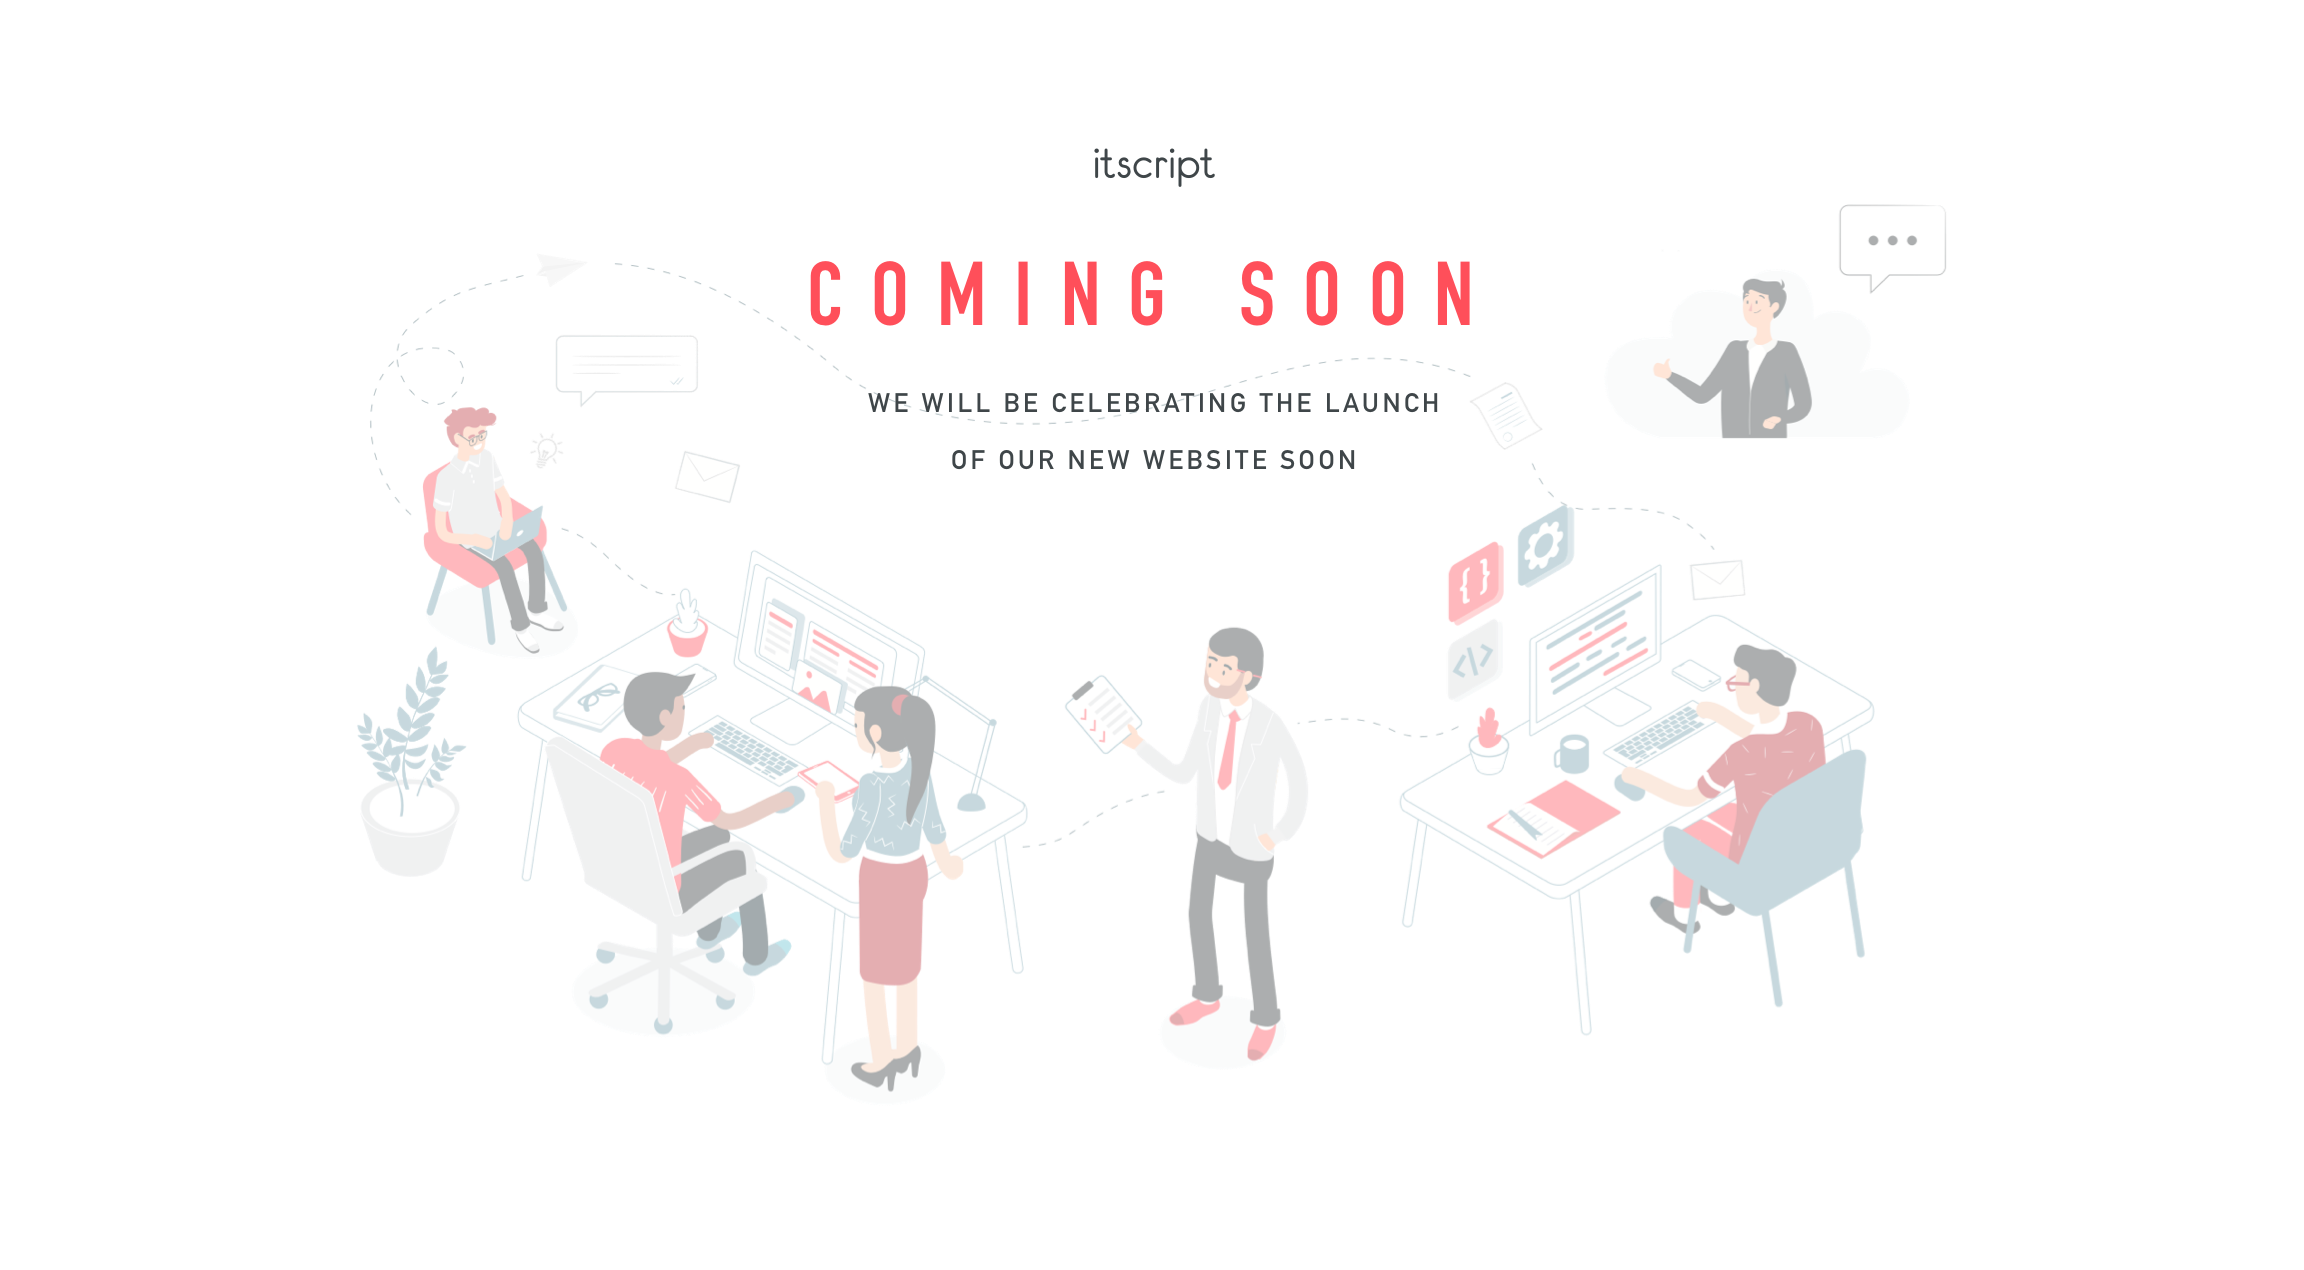 Coming soon. We will be celebrating the launch of our new website soon.